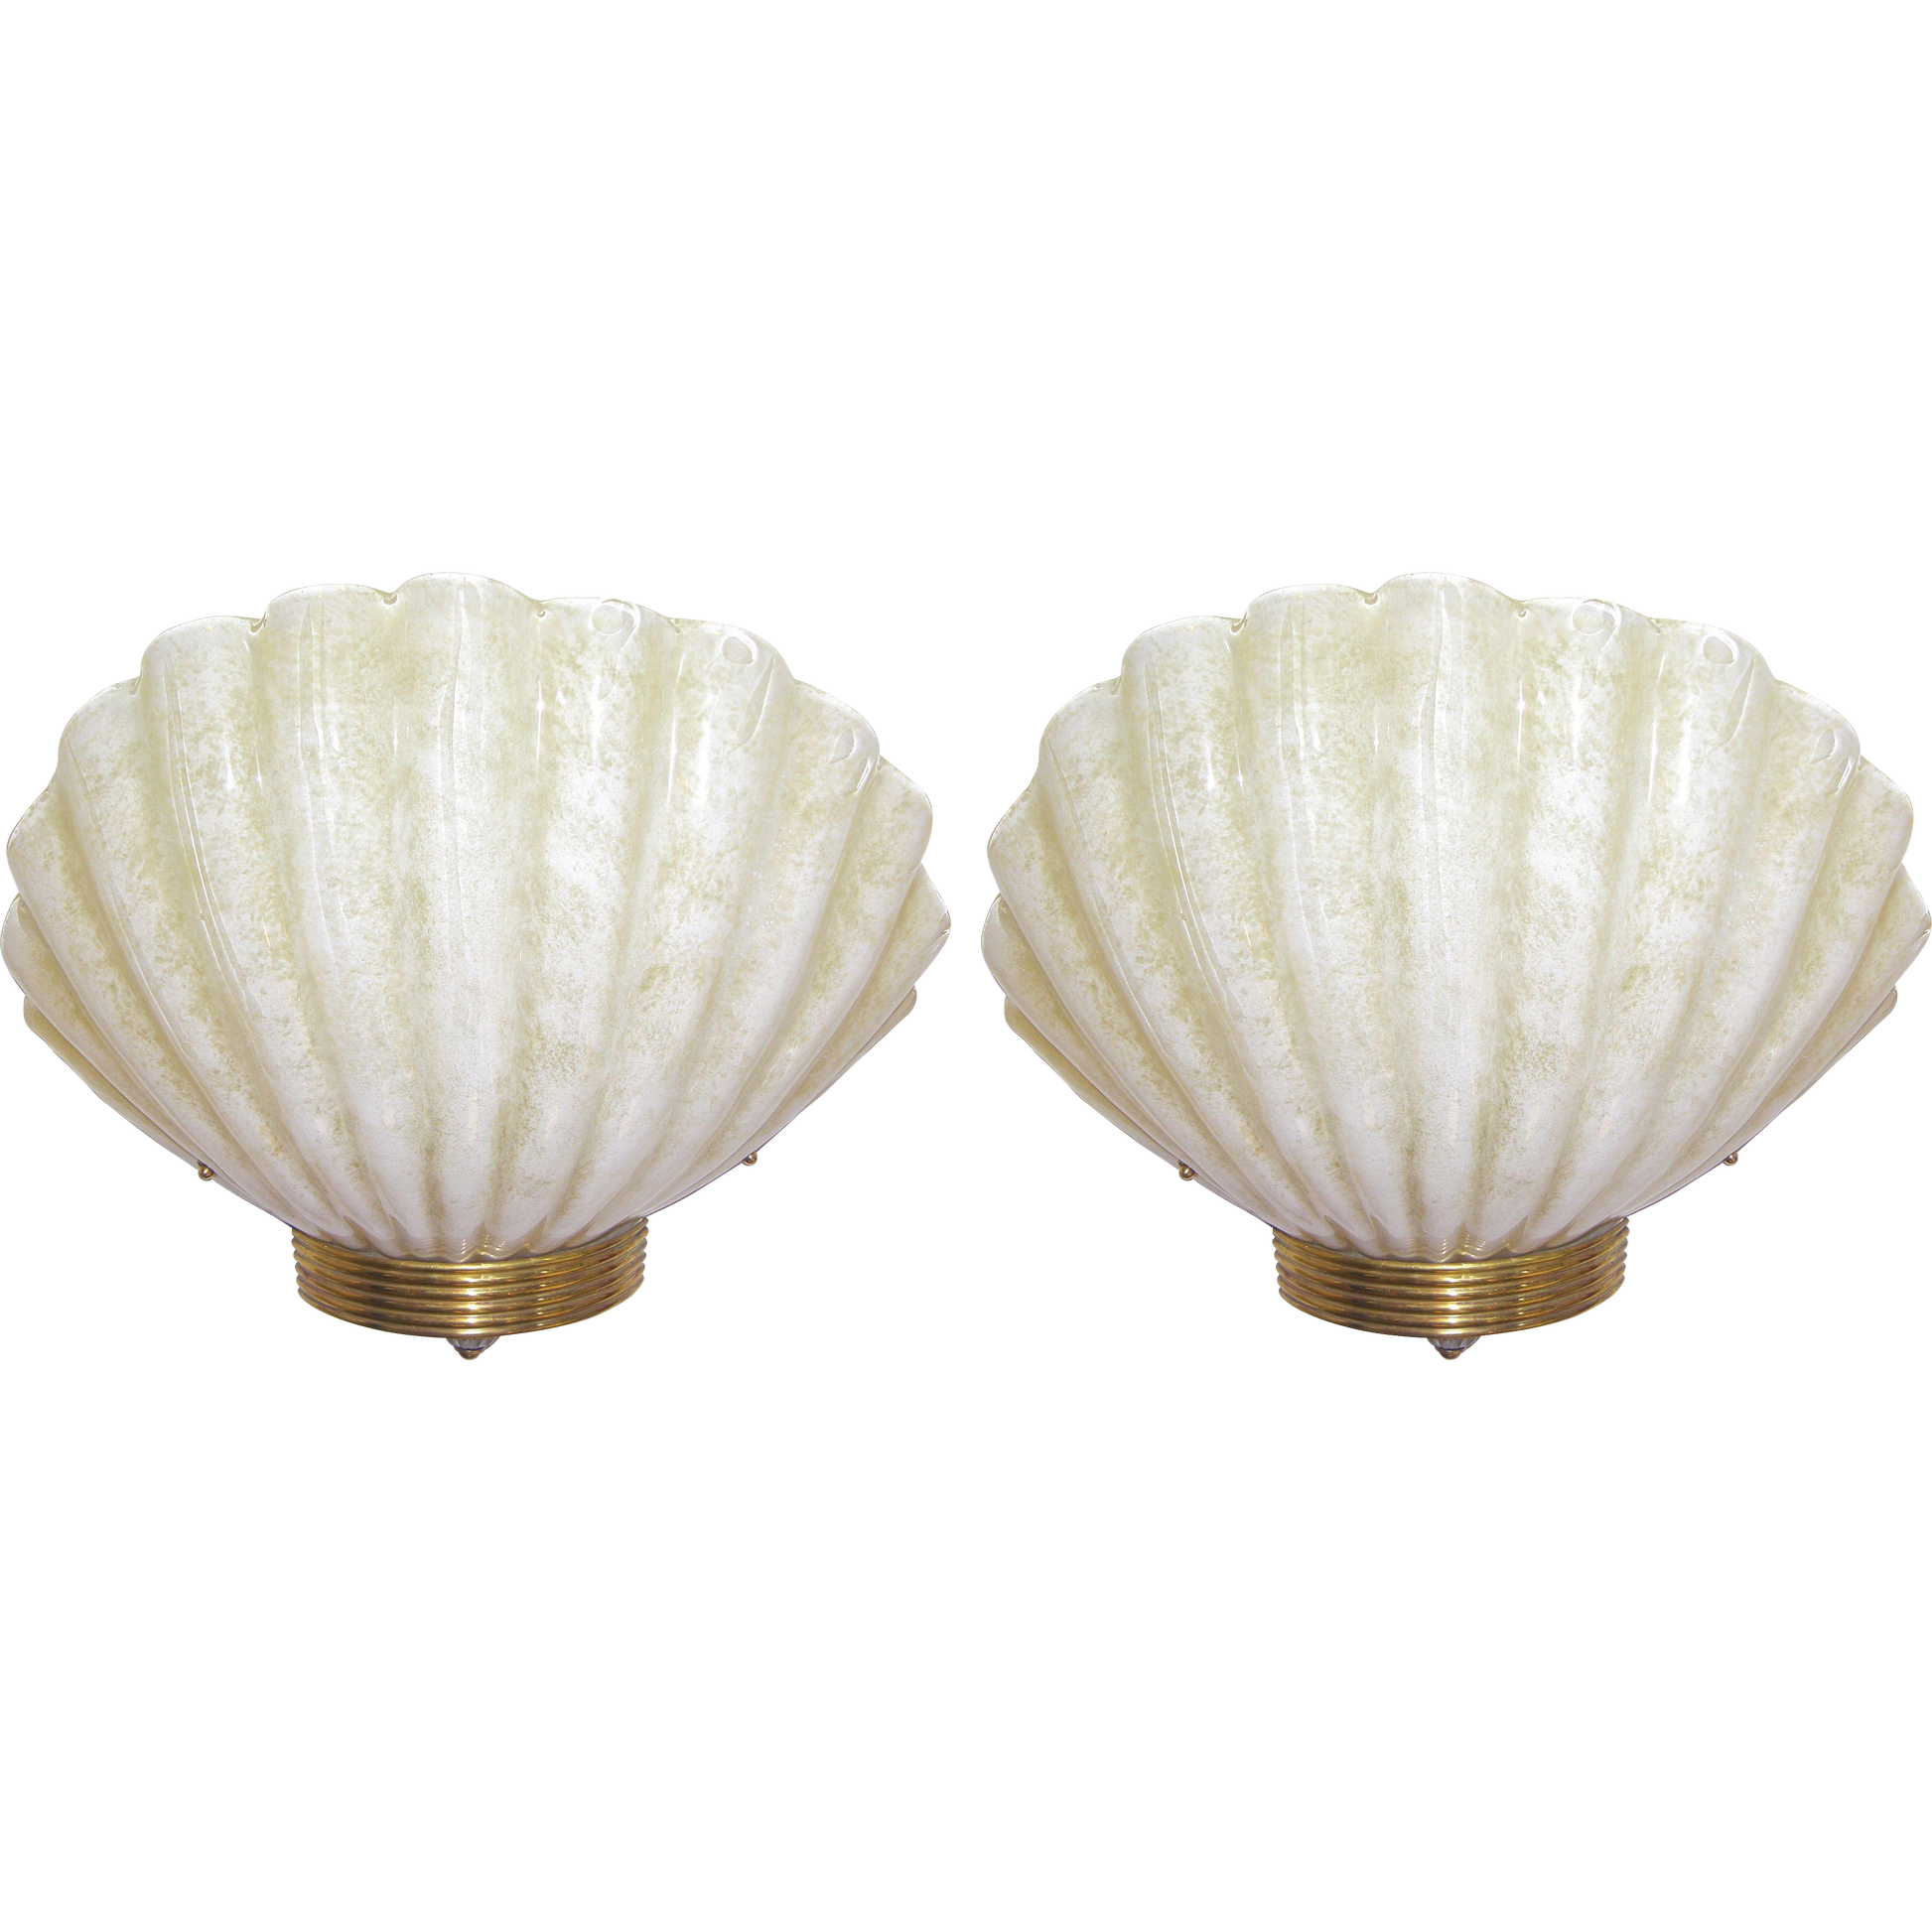 1970s Art Deco Style Pair of Vintage Shell Sconces in Gold & White Murano Glass - Cosulich Interiors & Antiques